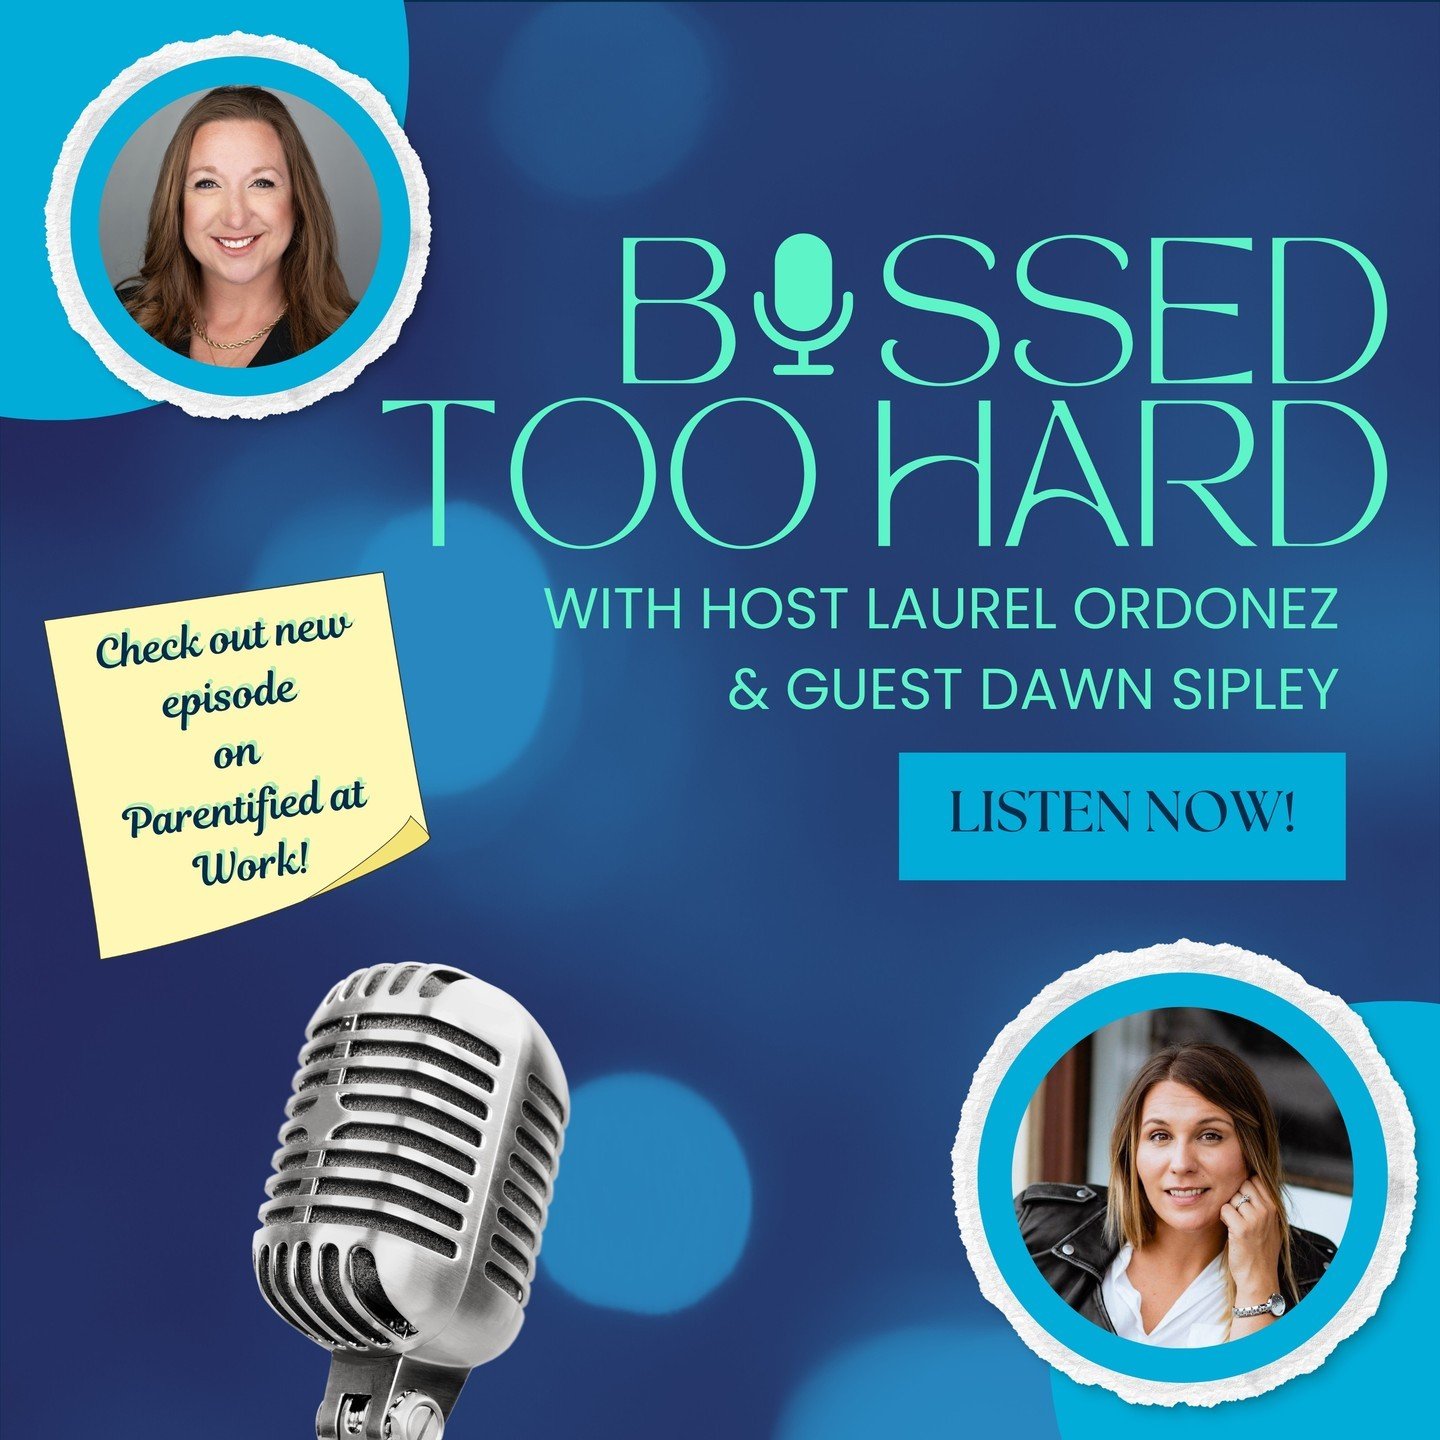 Check out the new episode on Bossed Too Hard to listen to Dawn's thoughts about parentification in the work environment.